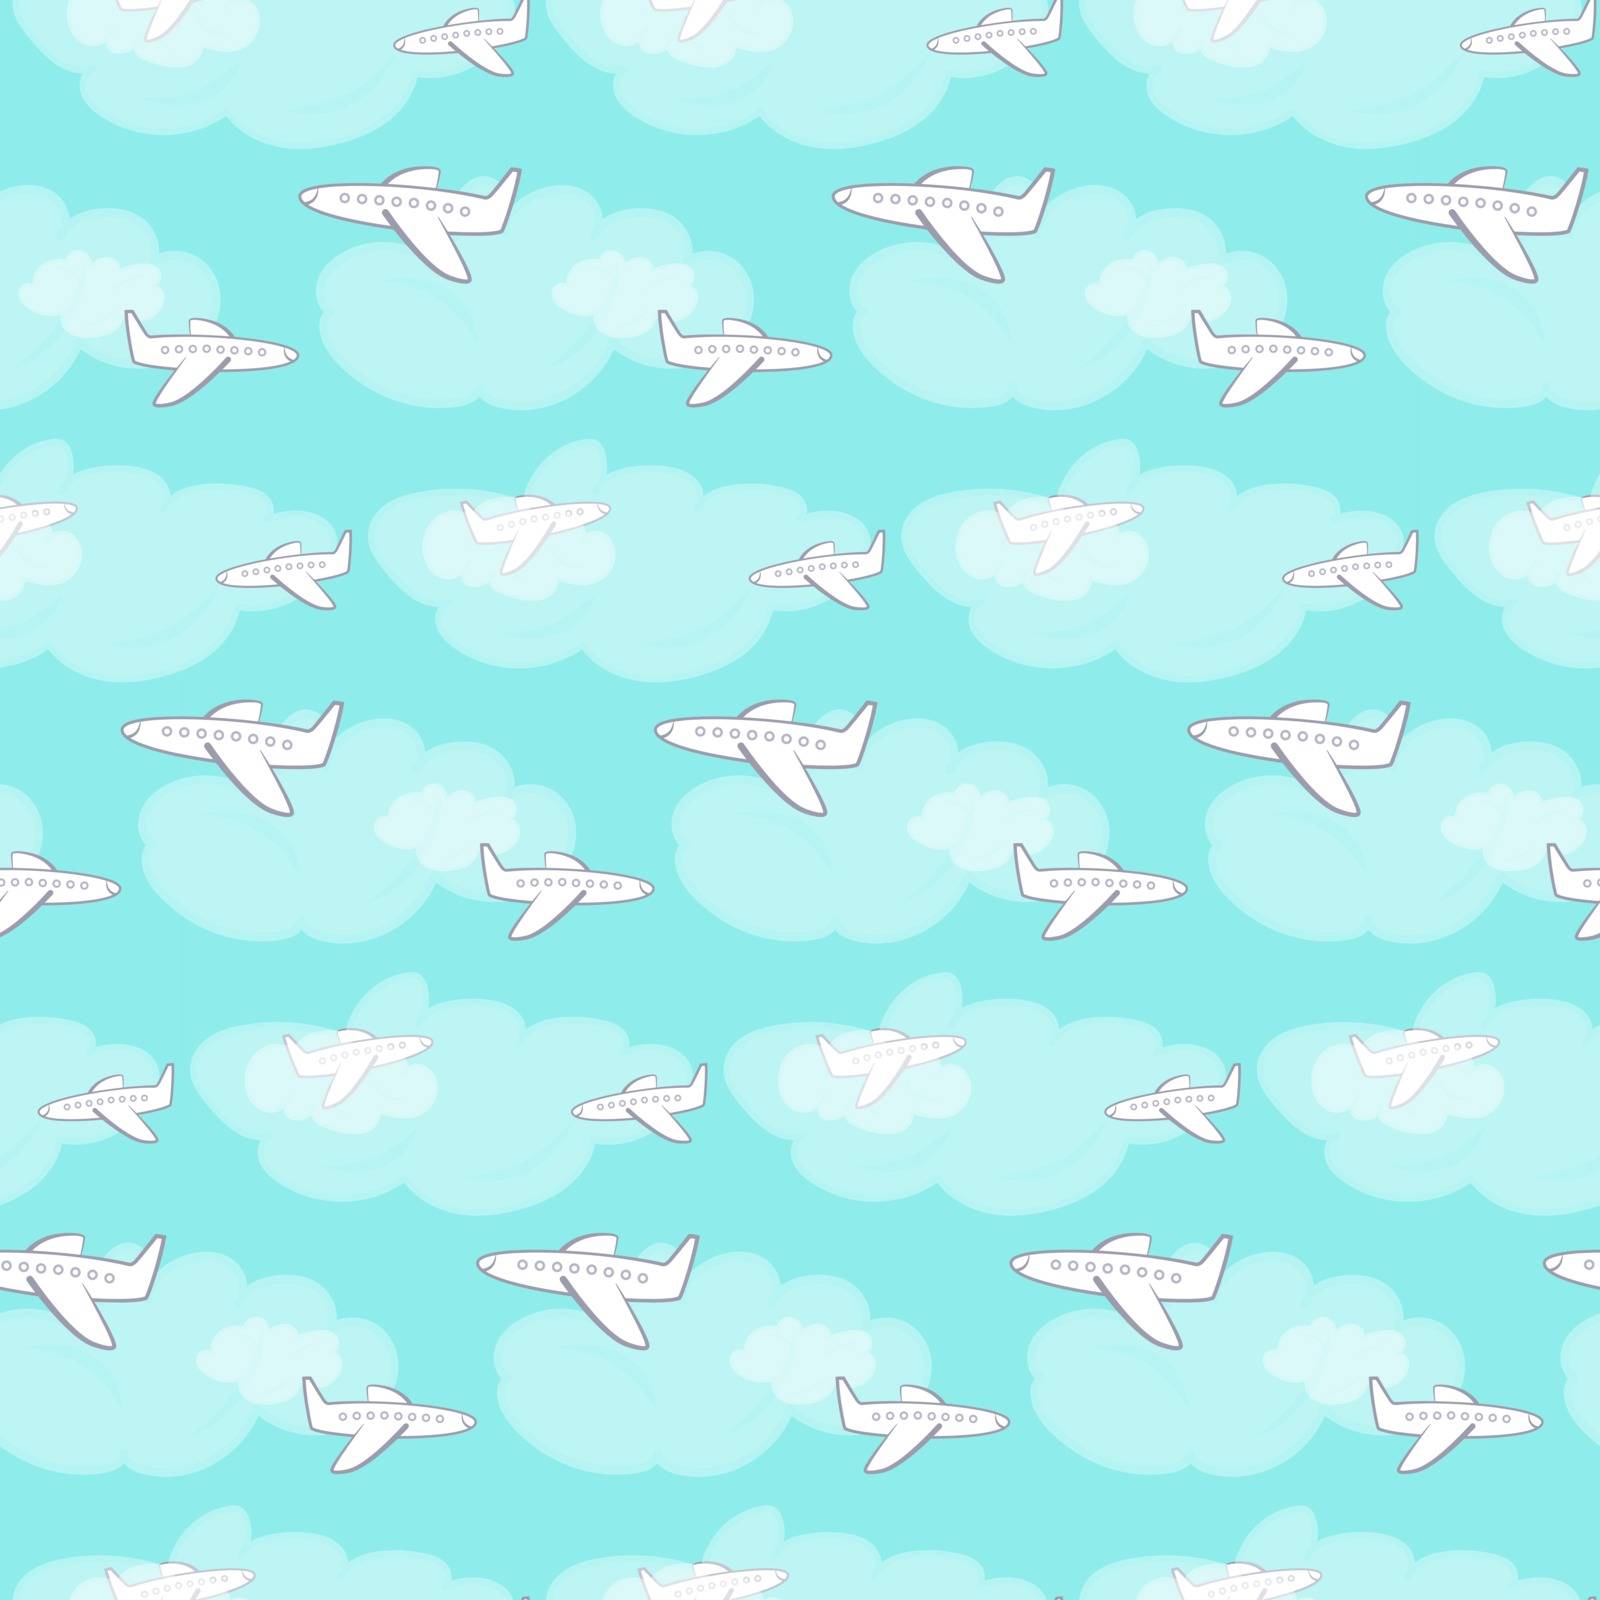 Seamless sky pattern with white planes and clouds by tatahnka